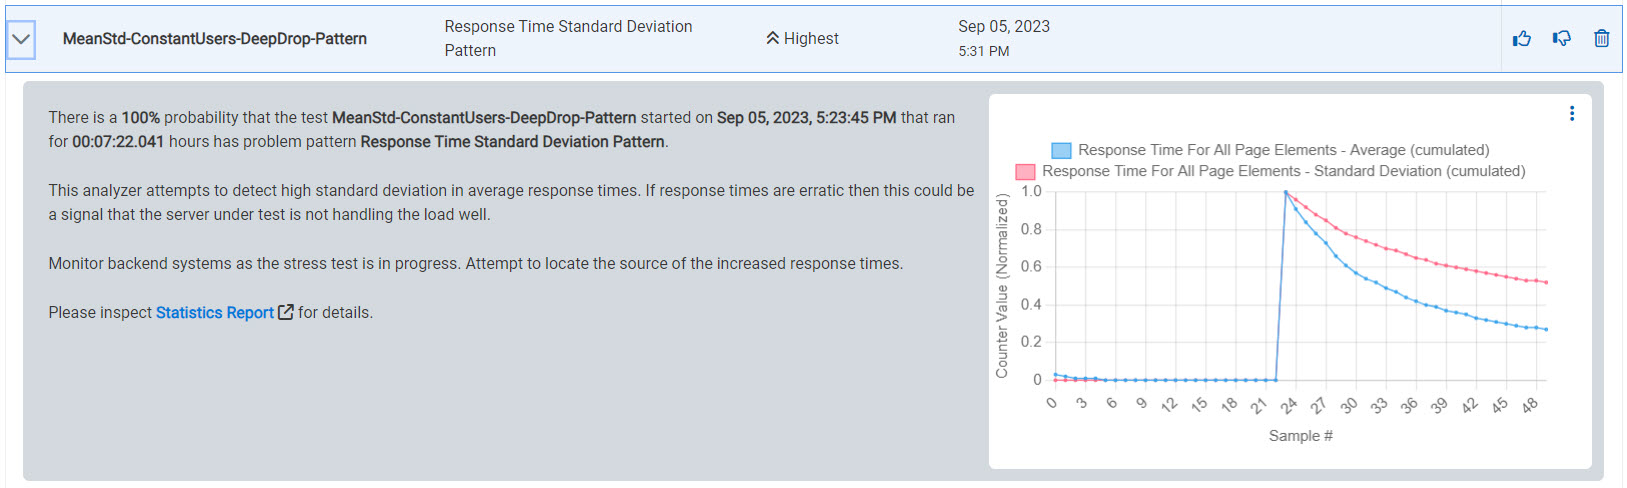 Image of a sample insight detail of the Response time standard deviation pattern parameter.